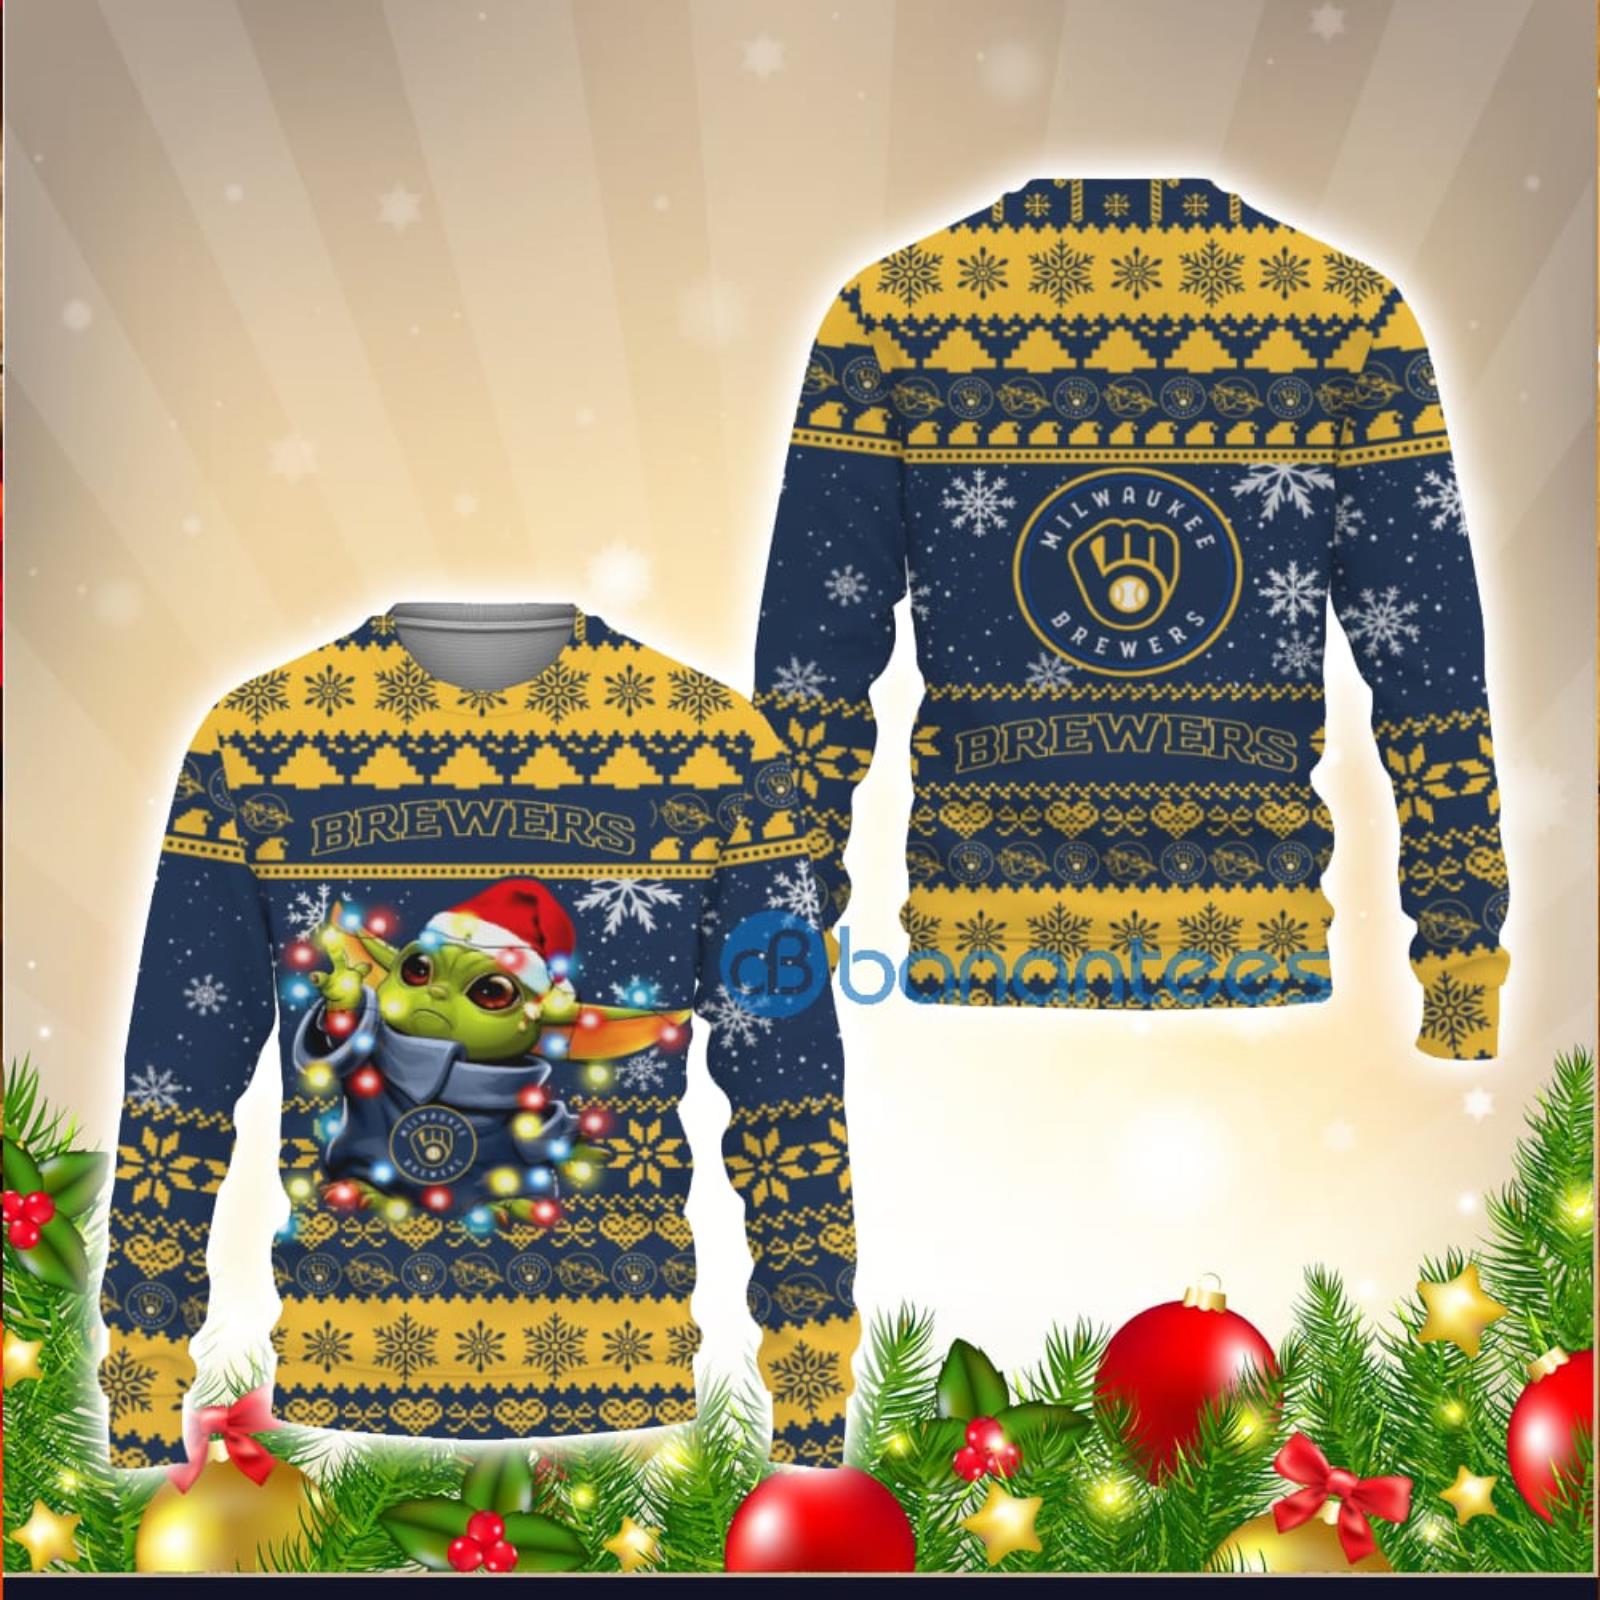 Milwaukee Brewers MLB Funny Grinch I Hate Morning People Unisex 3D Ugly  Christmas Sweater Christmas Gift For Men And Women - Banantees